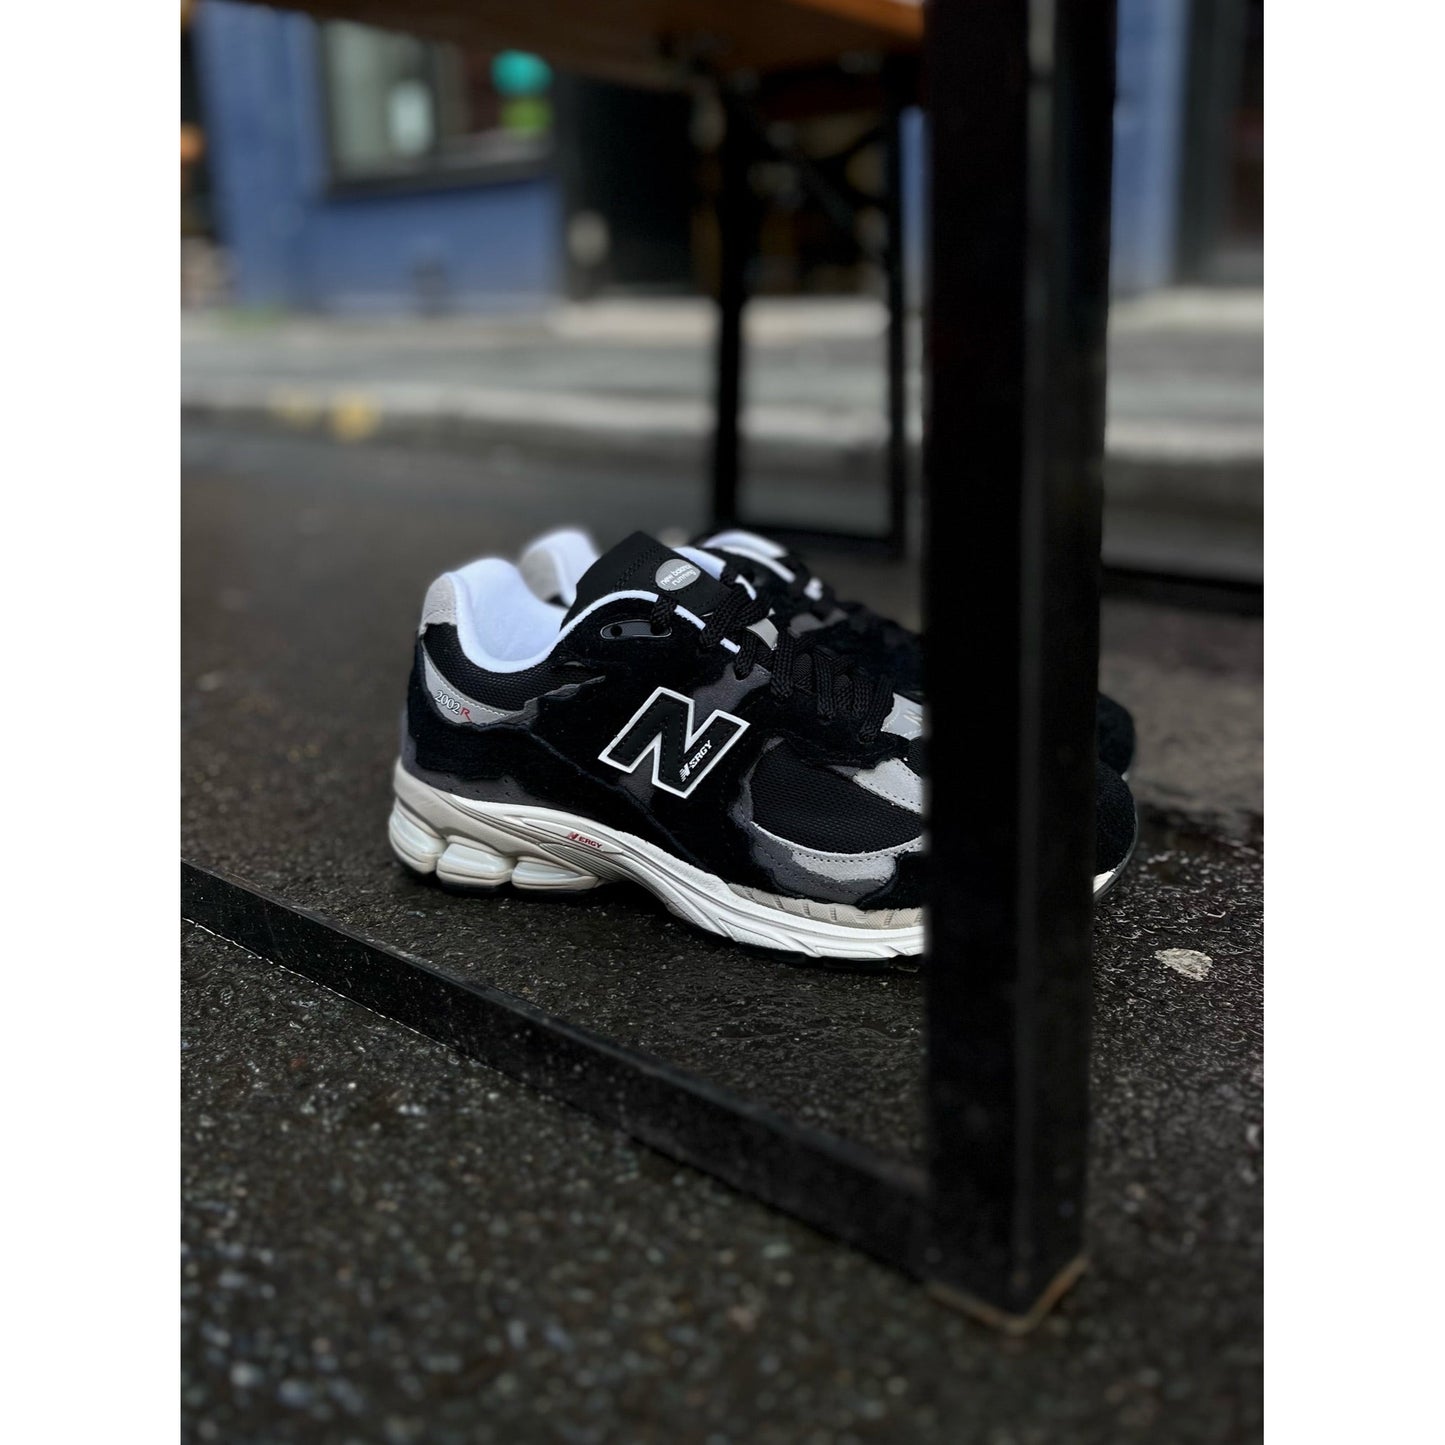 New Balance 2002R Protection Pack Black Grey by New Balance from £215.00